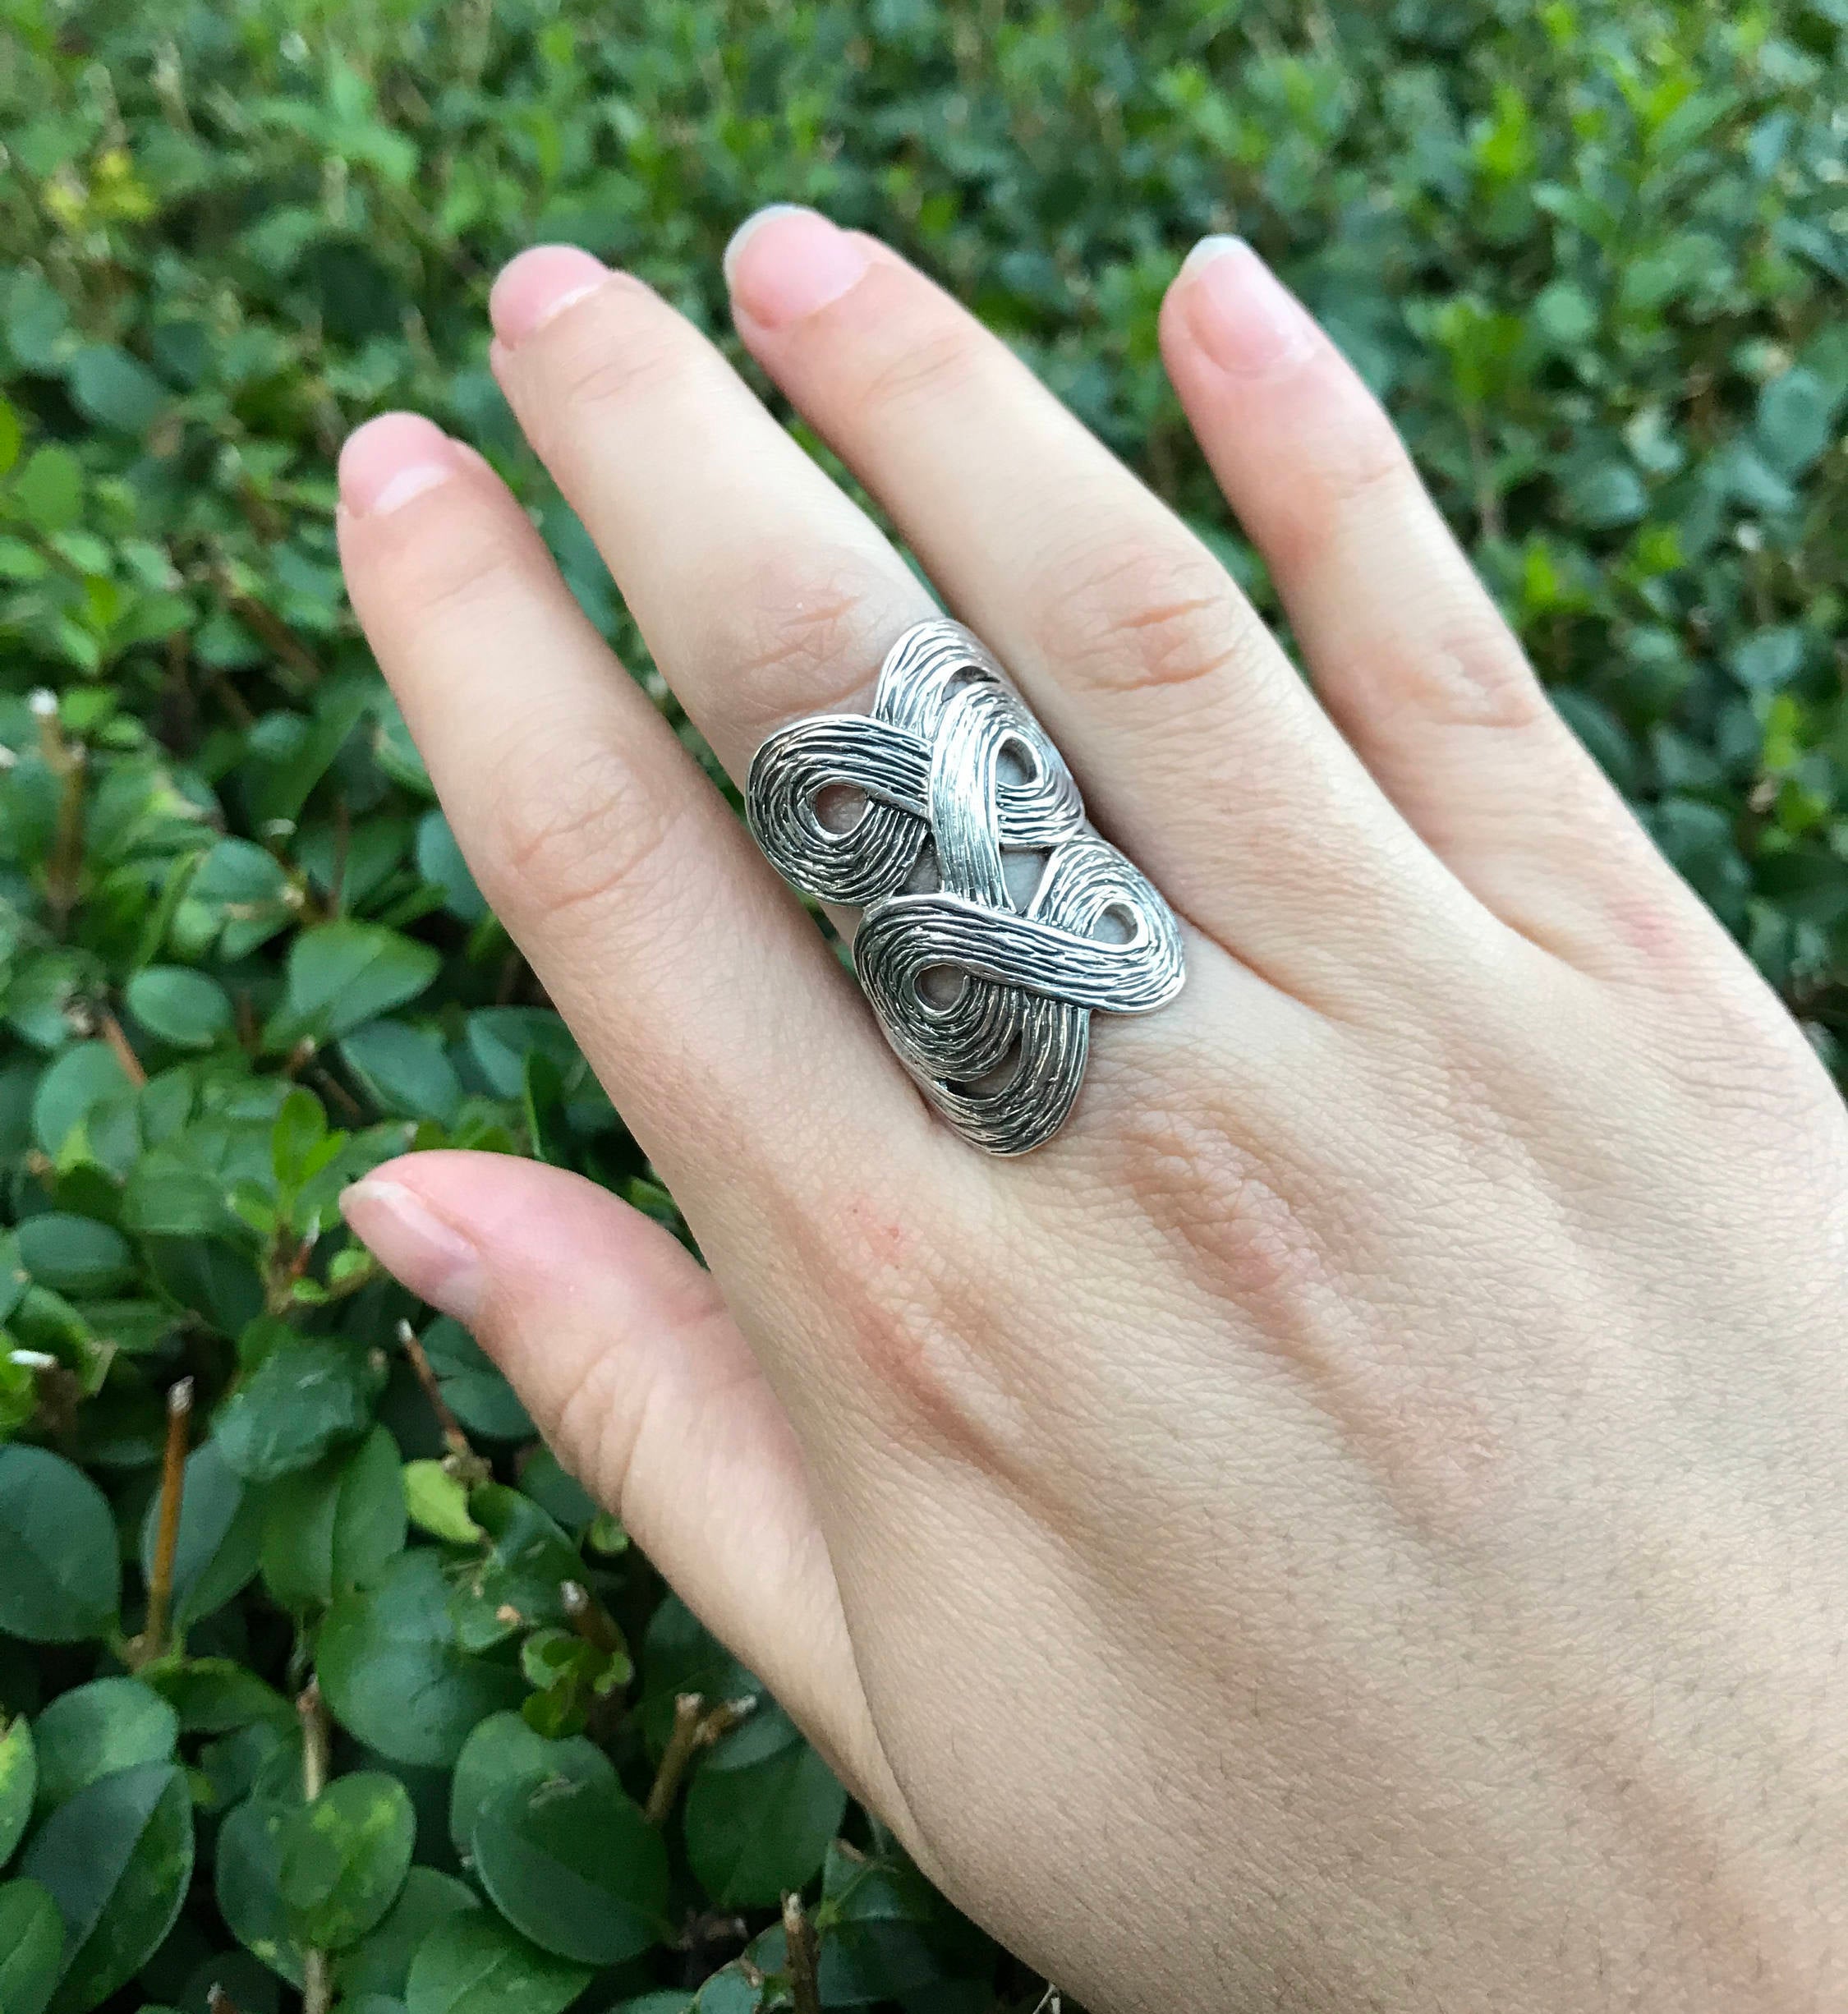 Silver Designer Ring, Infinity Ring, Solid Silver Ring, Statement Ring, Unique Silver Ring, Infinite Ring, Art Ring, Sterling Silver Ring